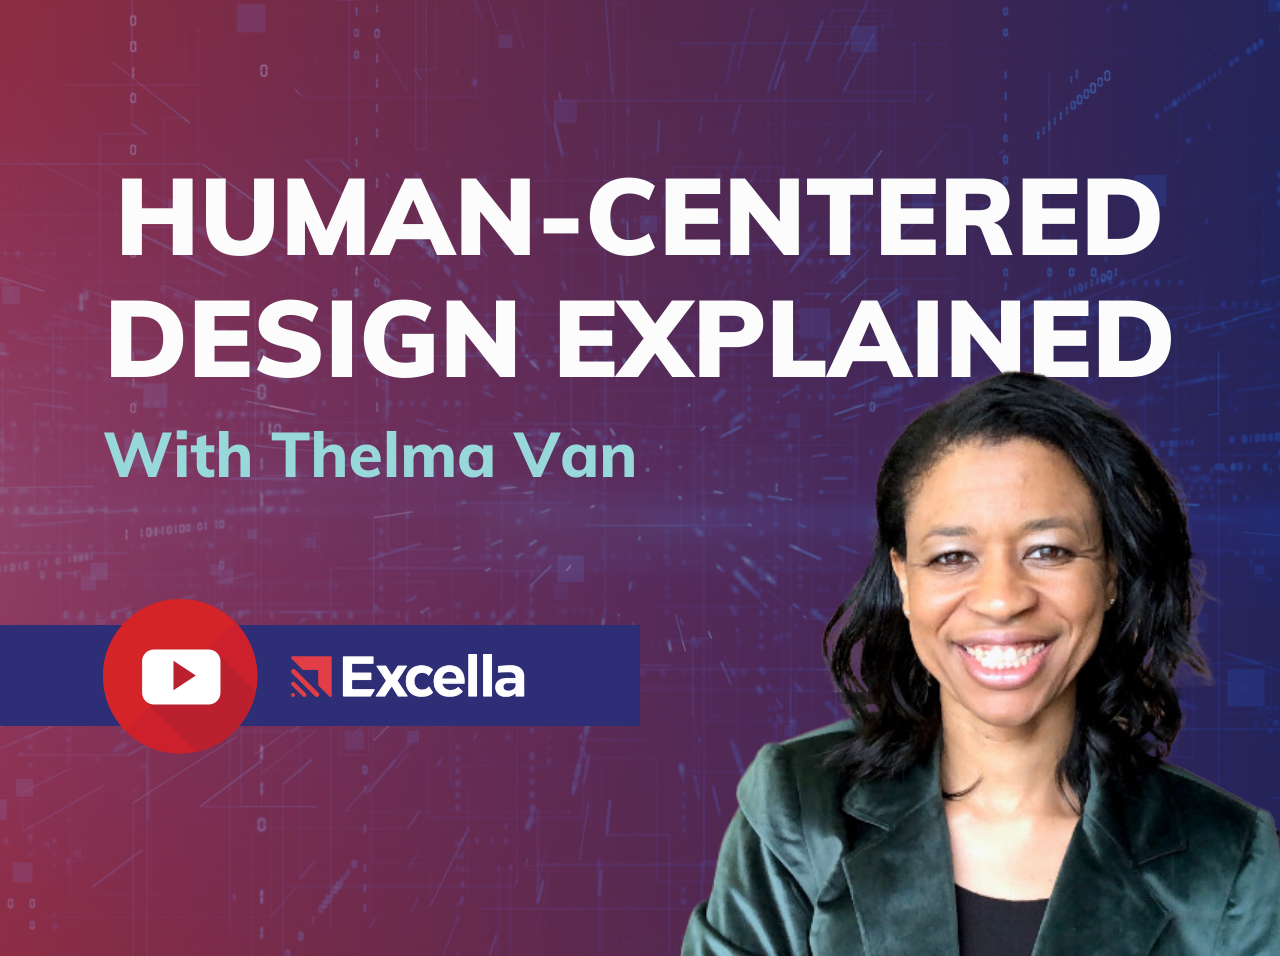 Human-Centered Design Explained with Thelma Van